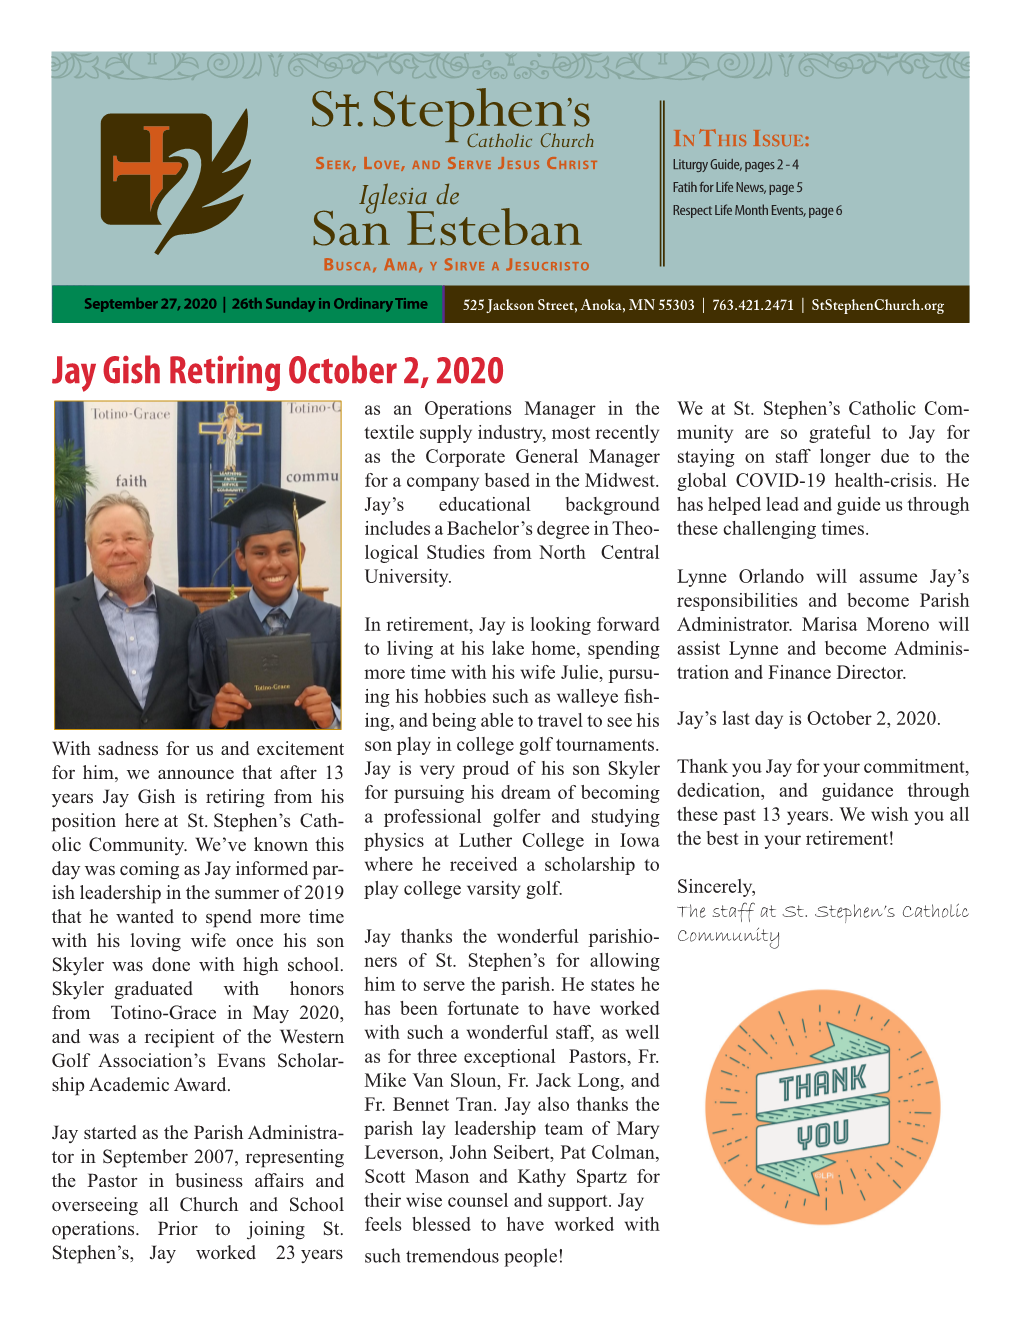 Jay Gish Retiring October 2, 2020 As an Operations Manager in the We at St